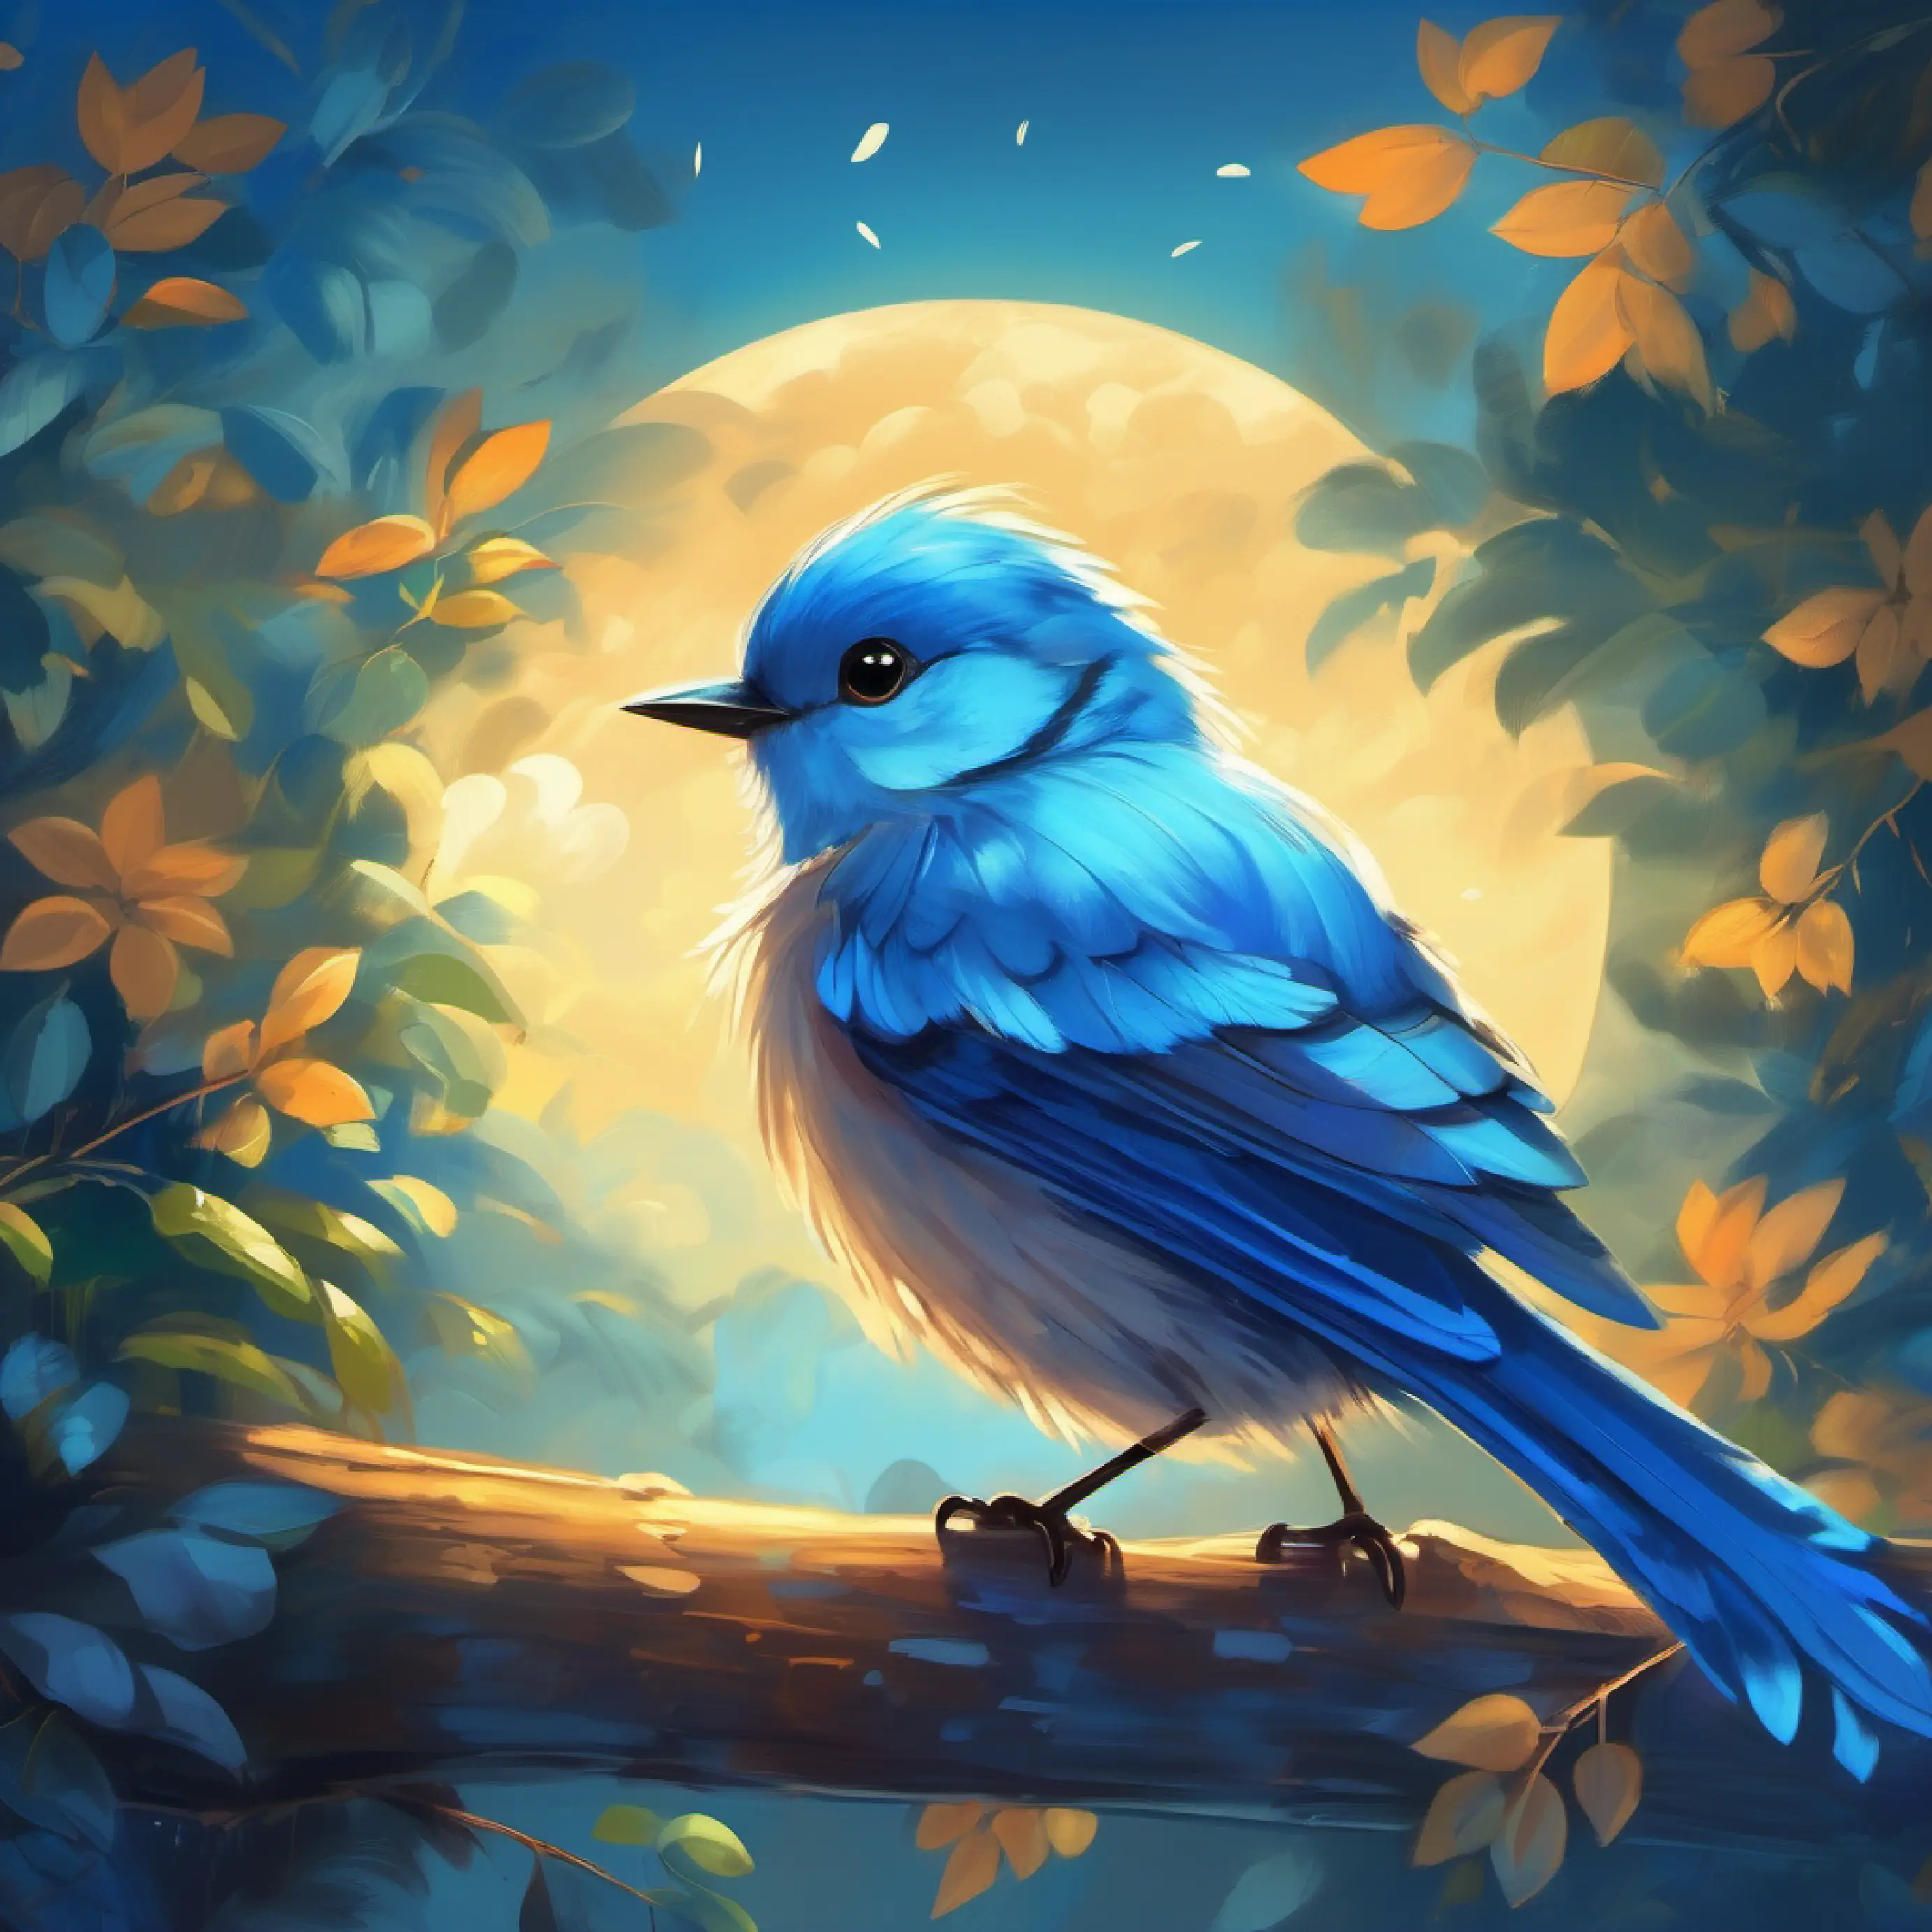 Little bird with bright blue feathers, cheerful waking up earlier than usual, under the moonlight.